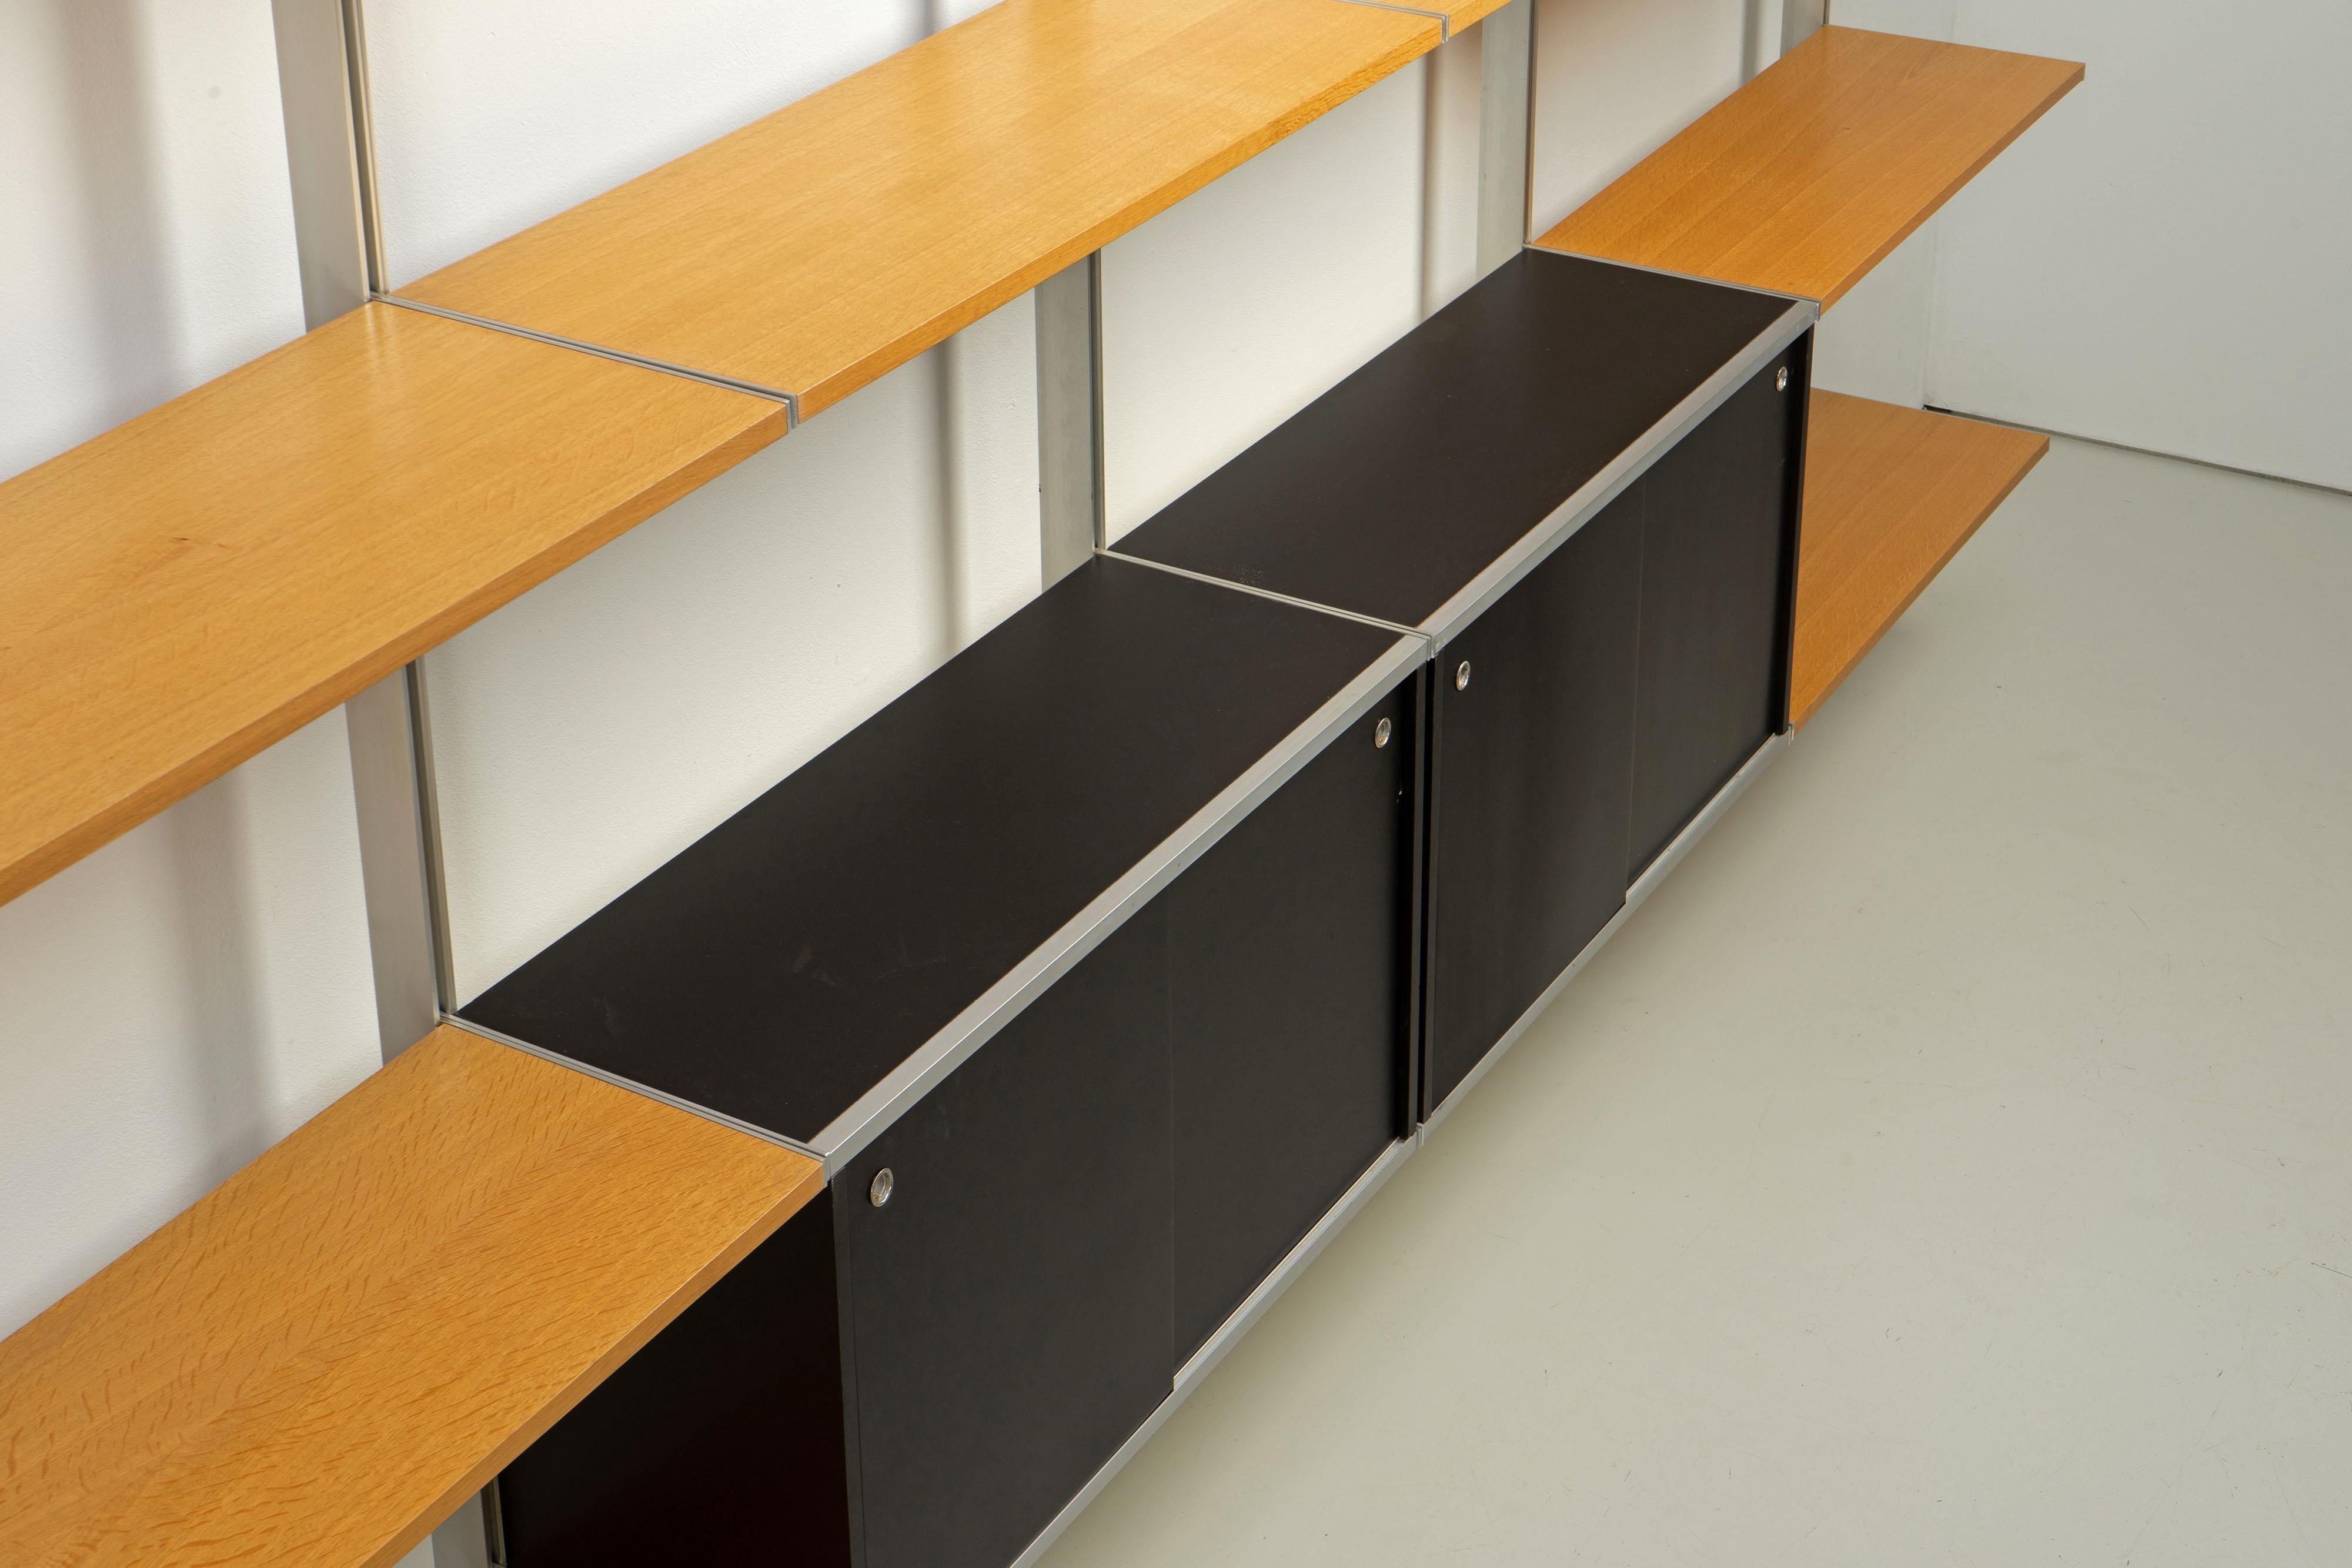 Aluminum Mid Century Shelving System by George Nelson CSS for Herman Miller, 1960s, Oak